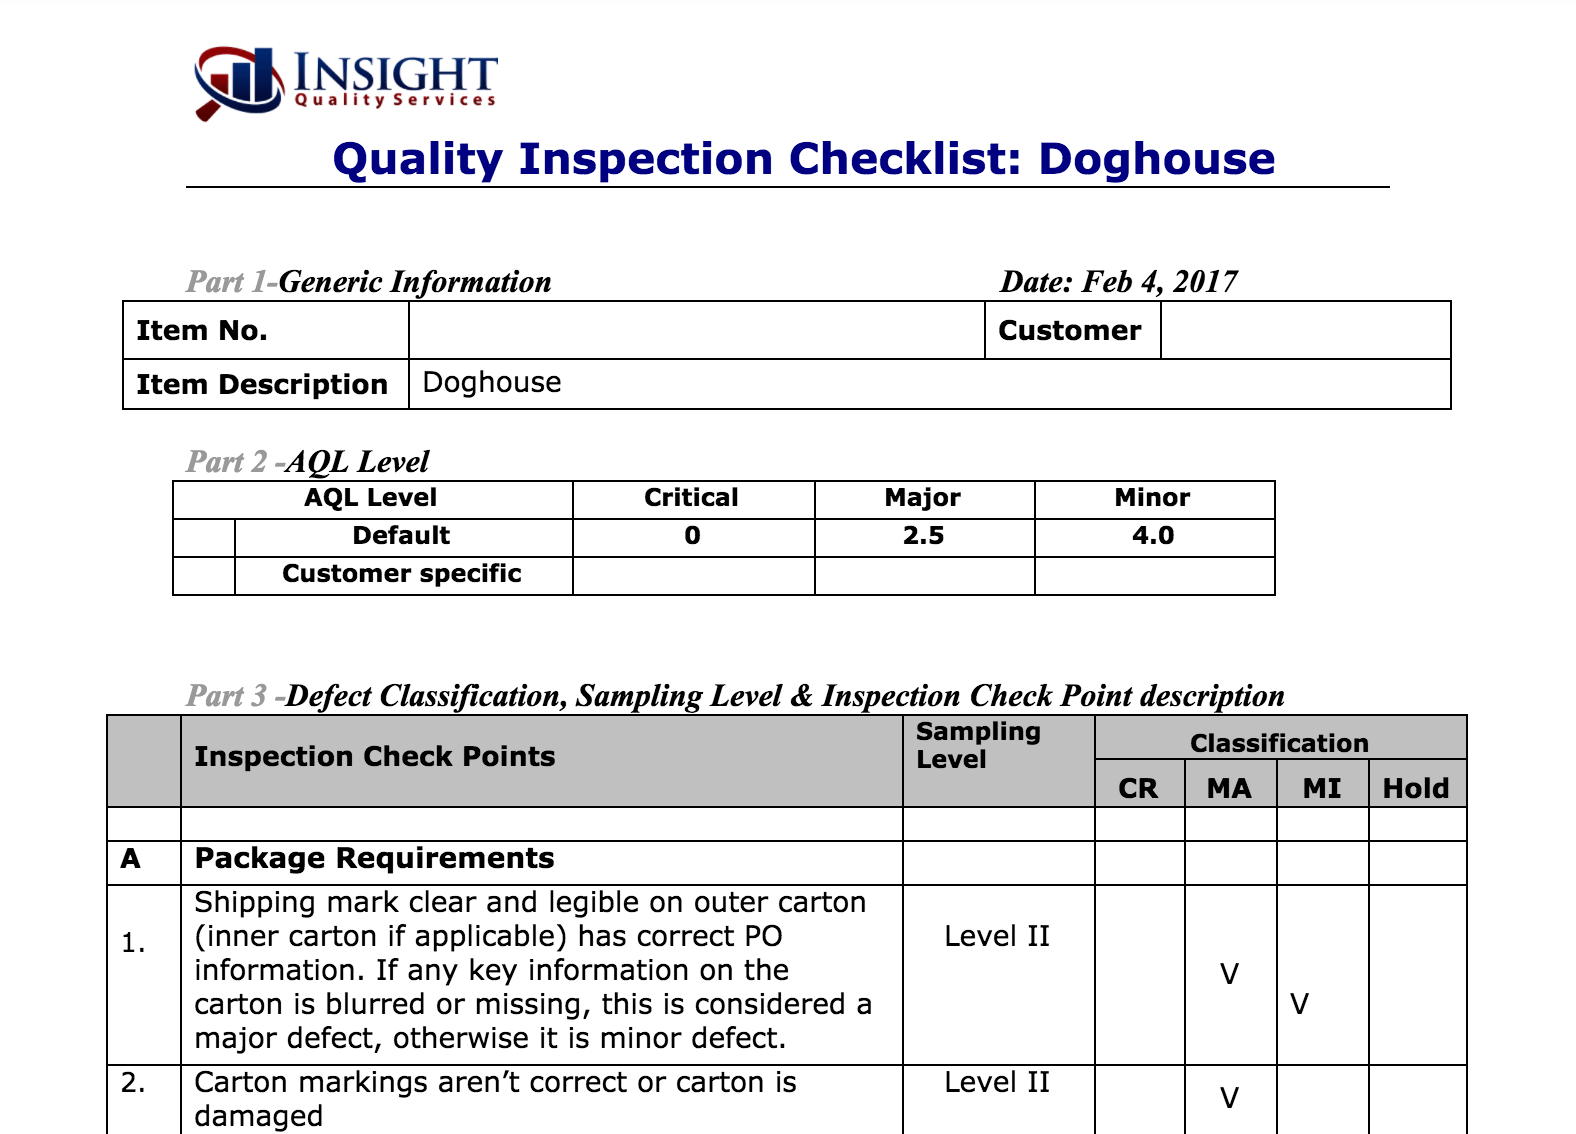 Quality Control Checklist How to Create One (With Sample)